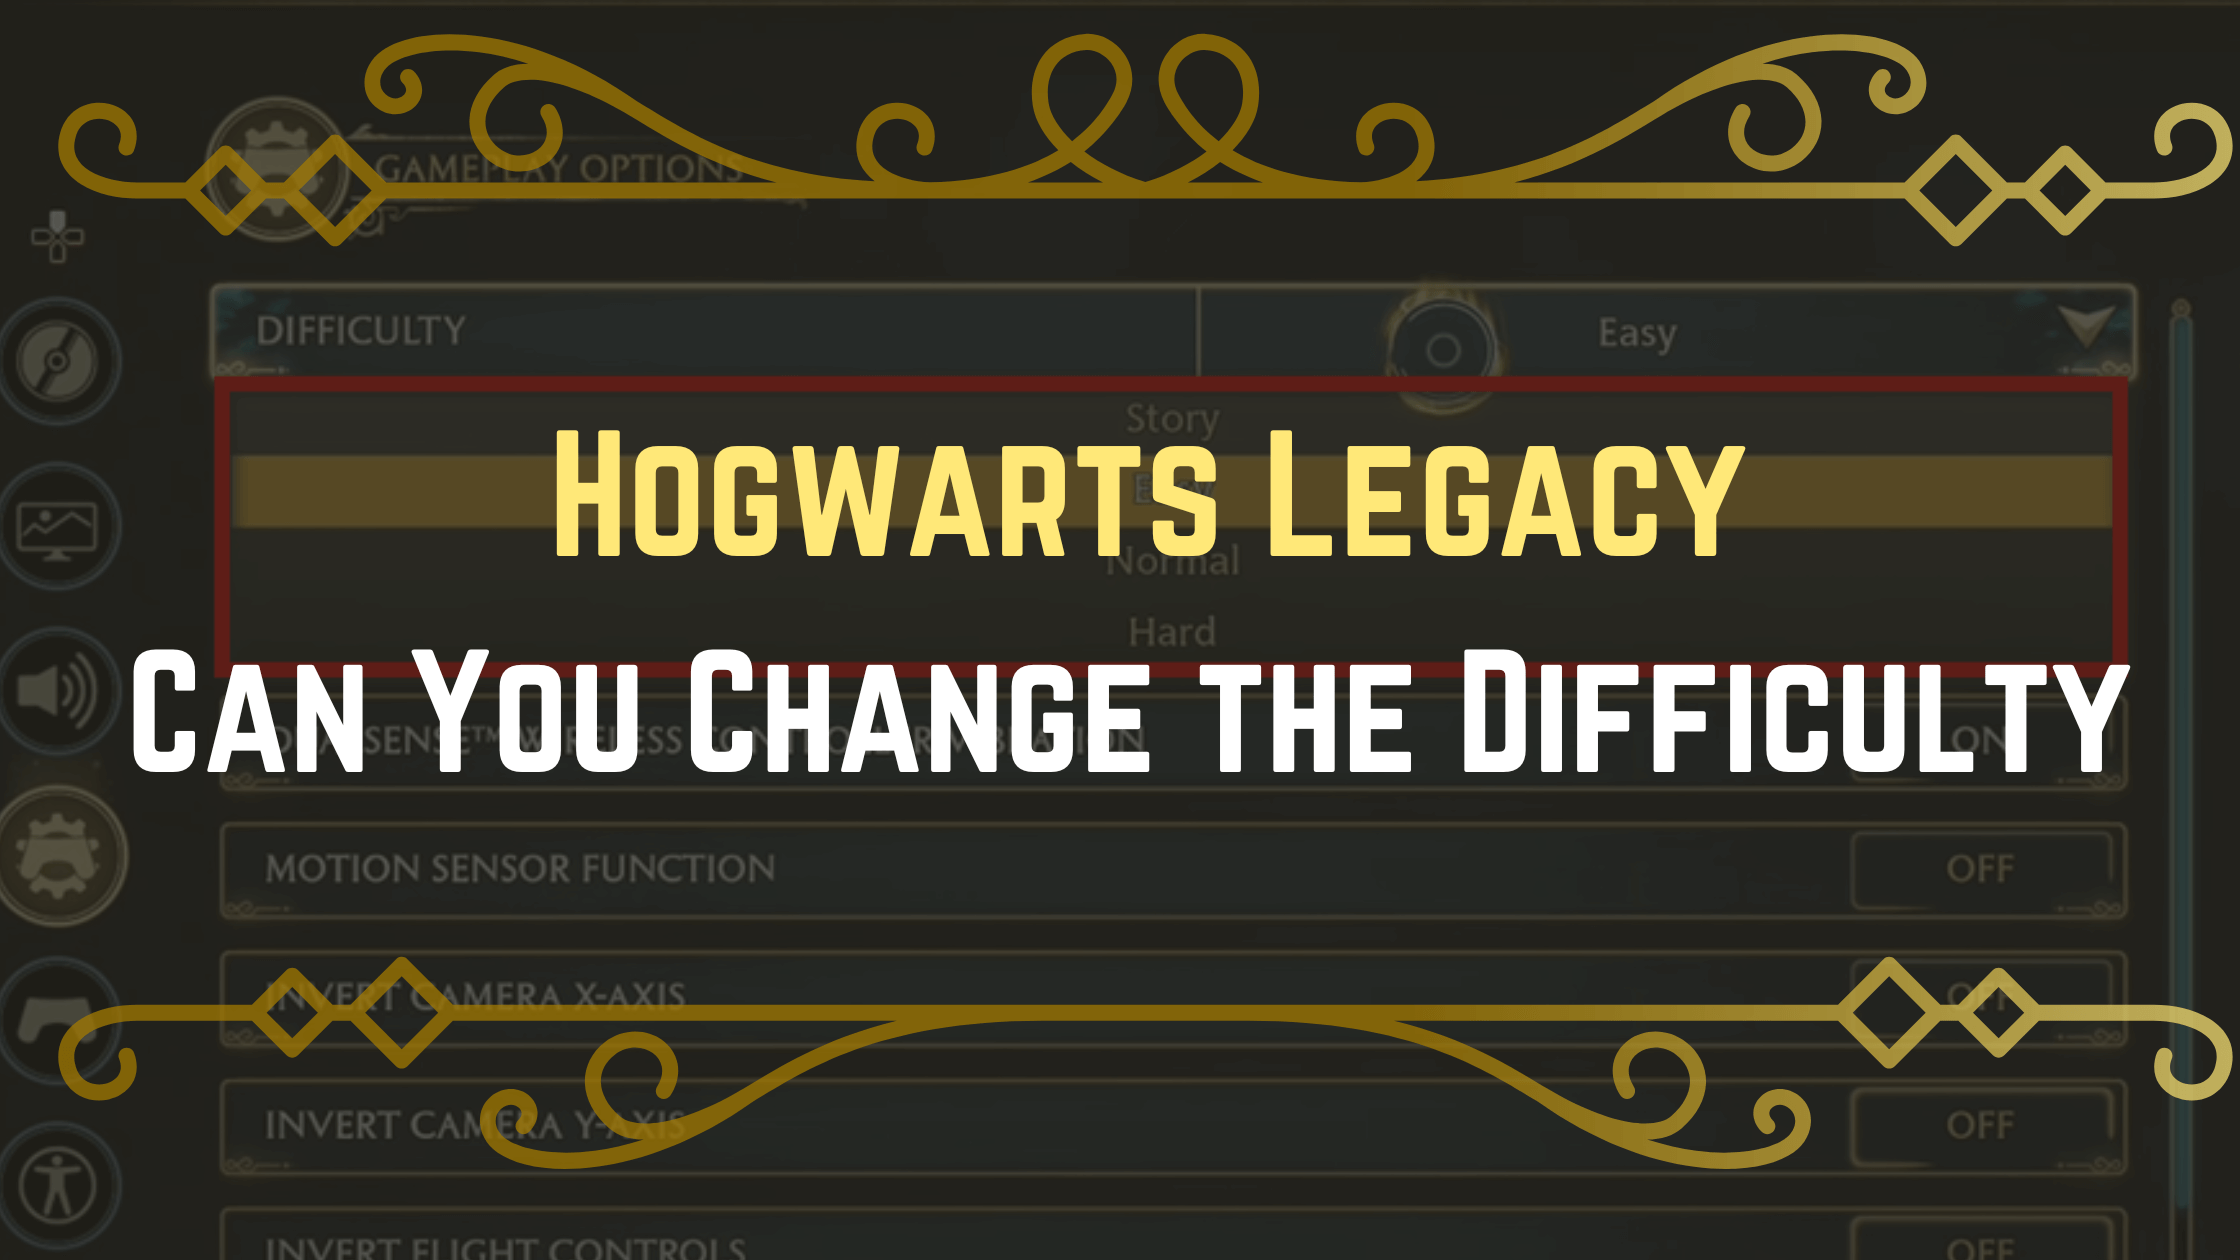 Can You Change the Difficulty in Hogwarts Legacy?